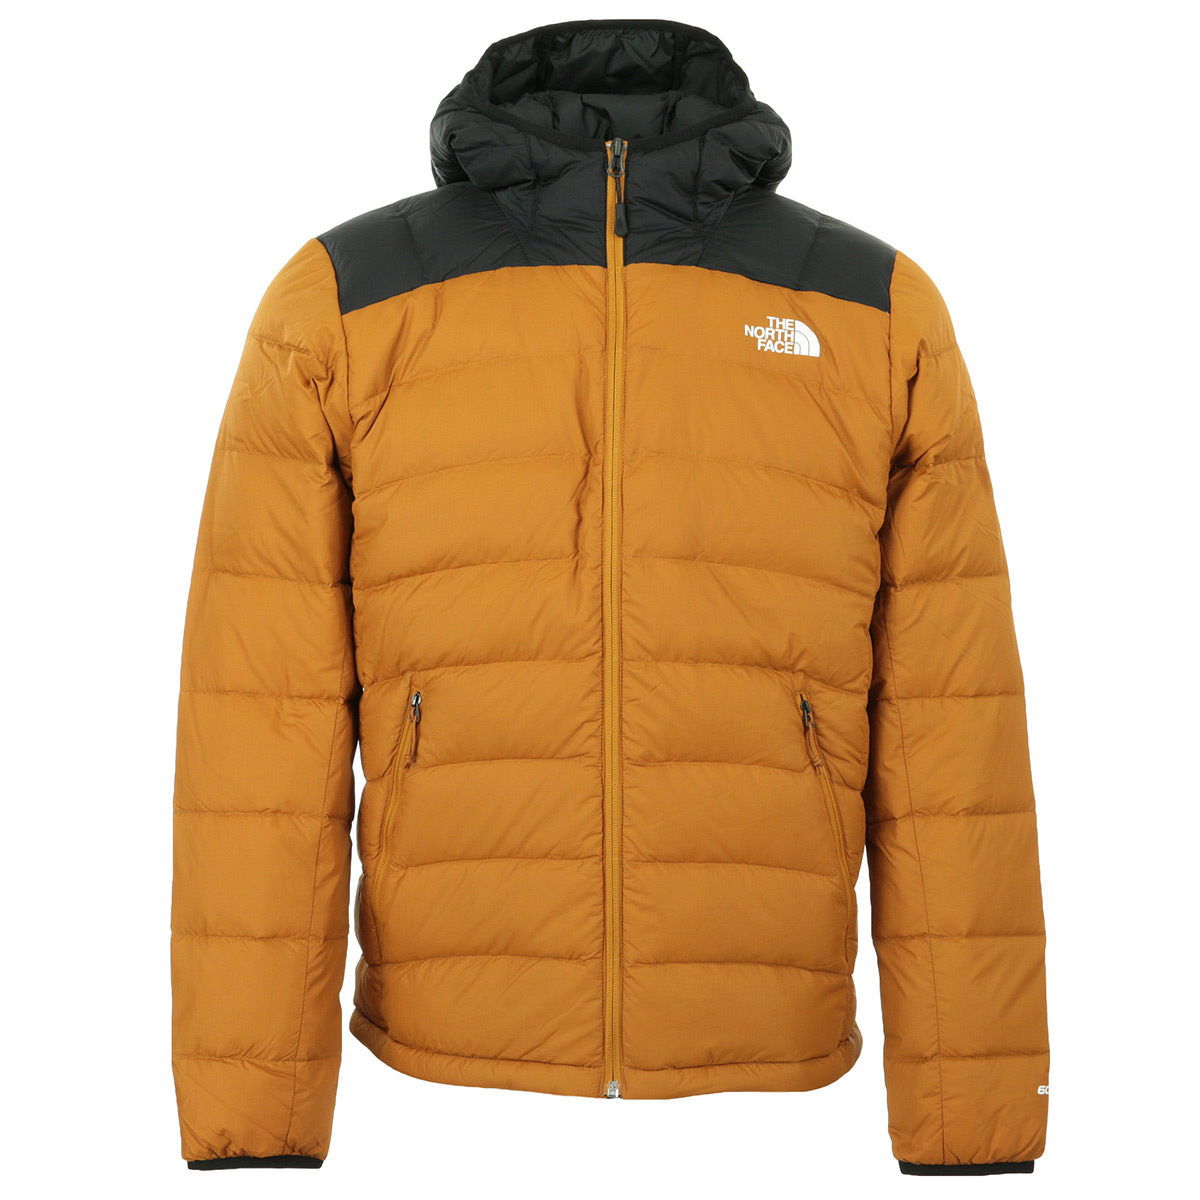 The North Face "La Paz Hooded Jacket"